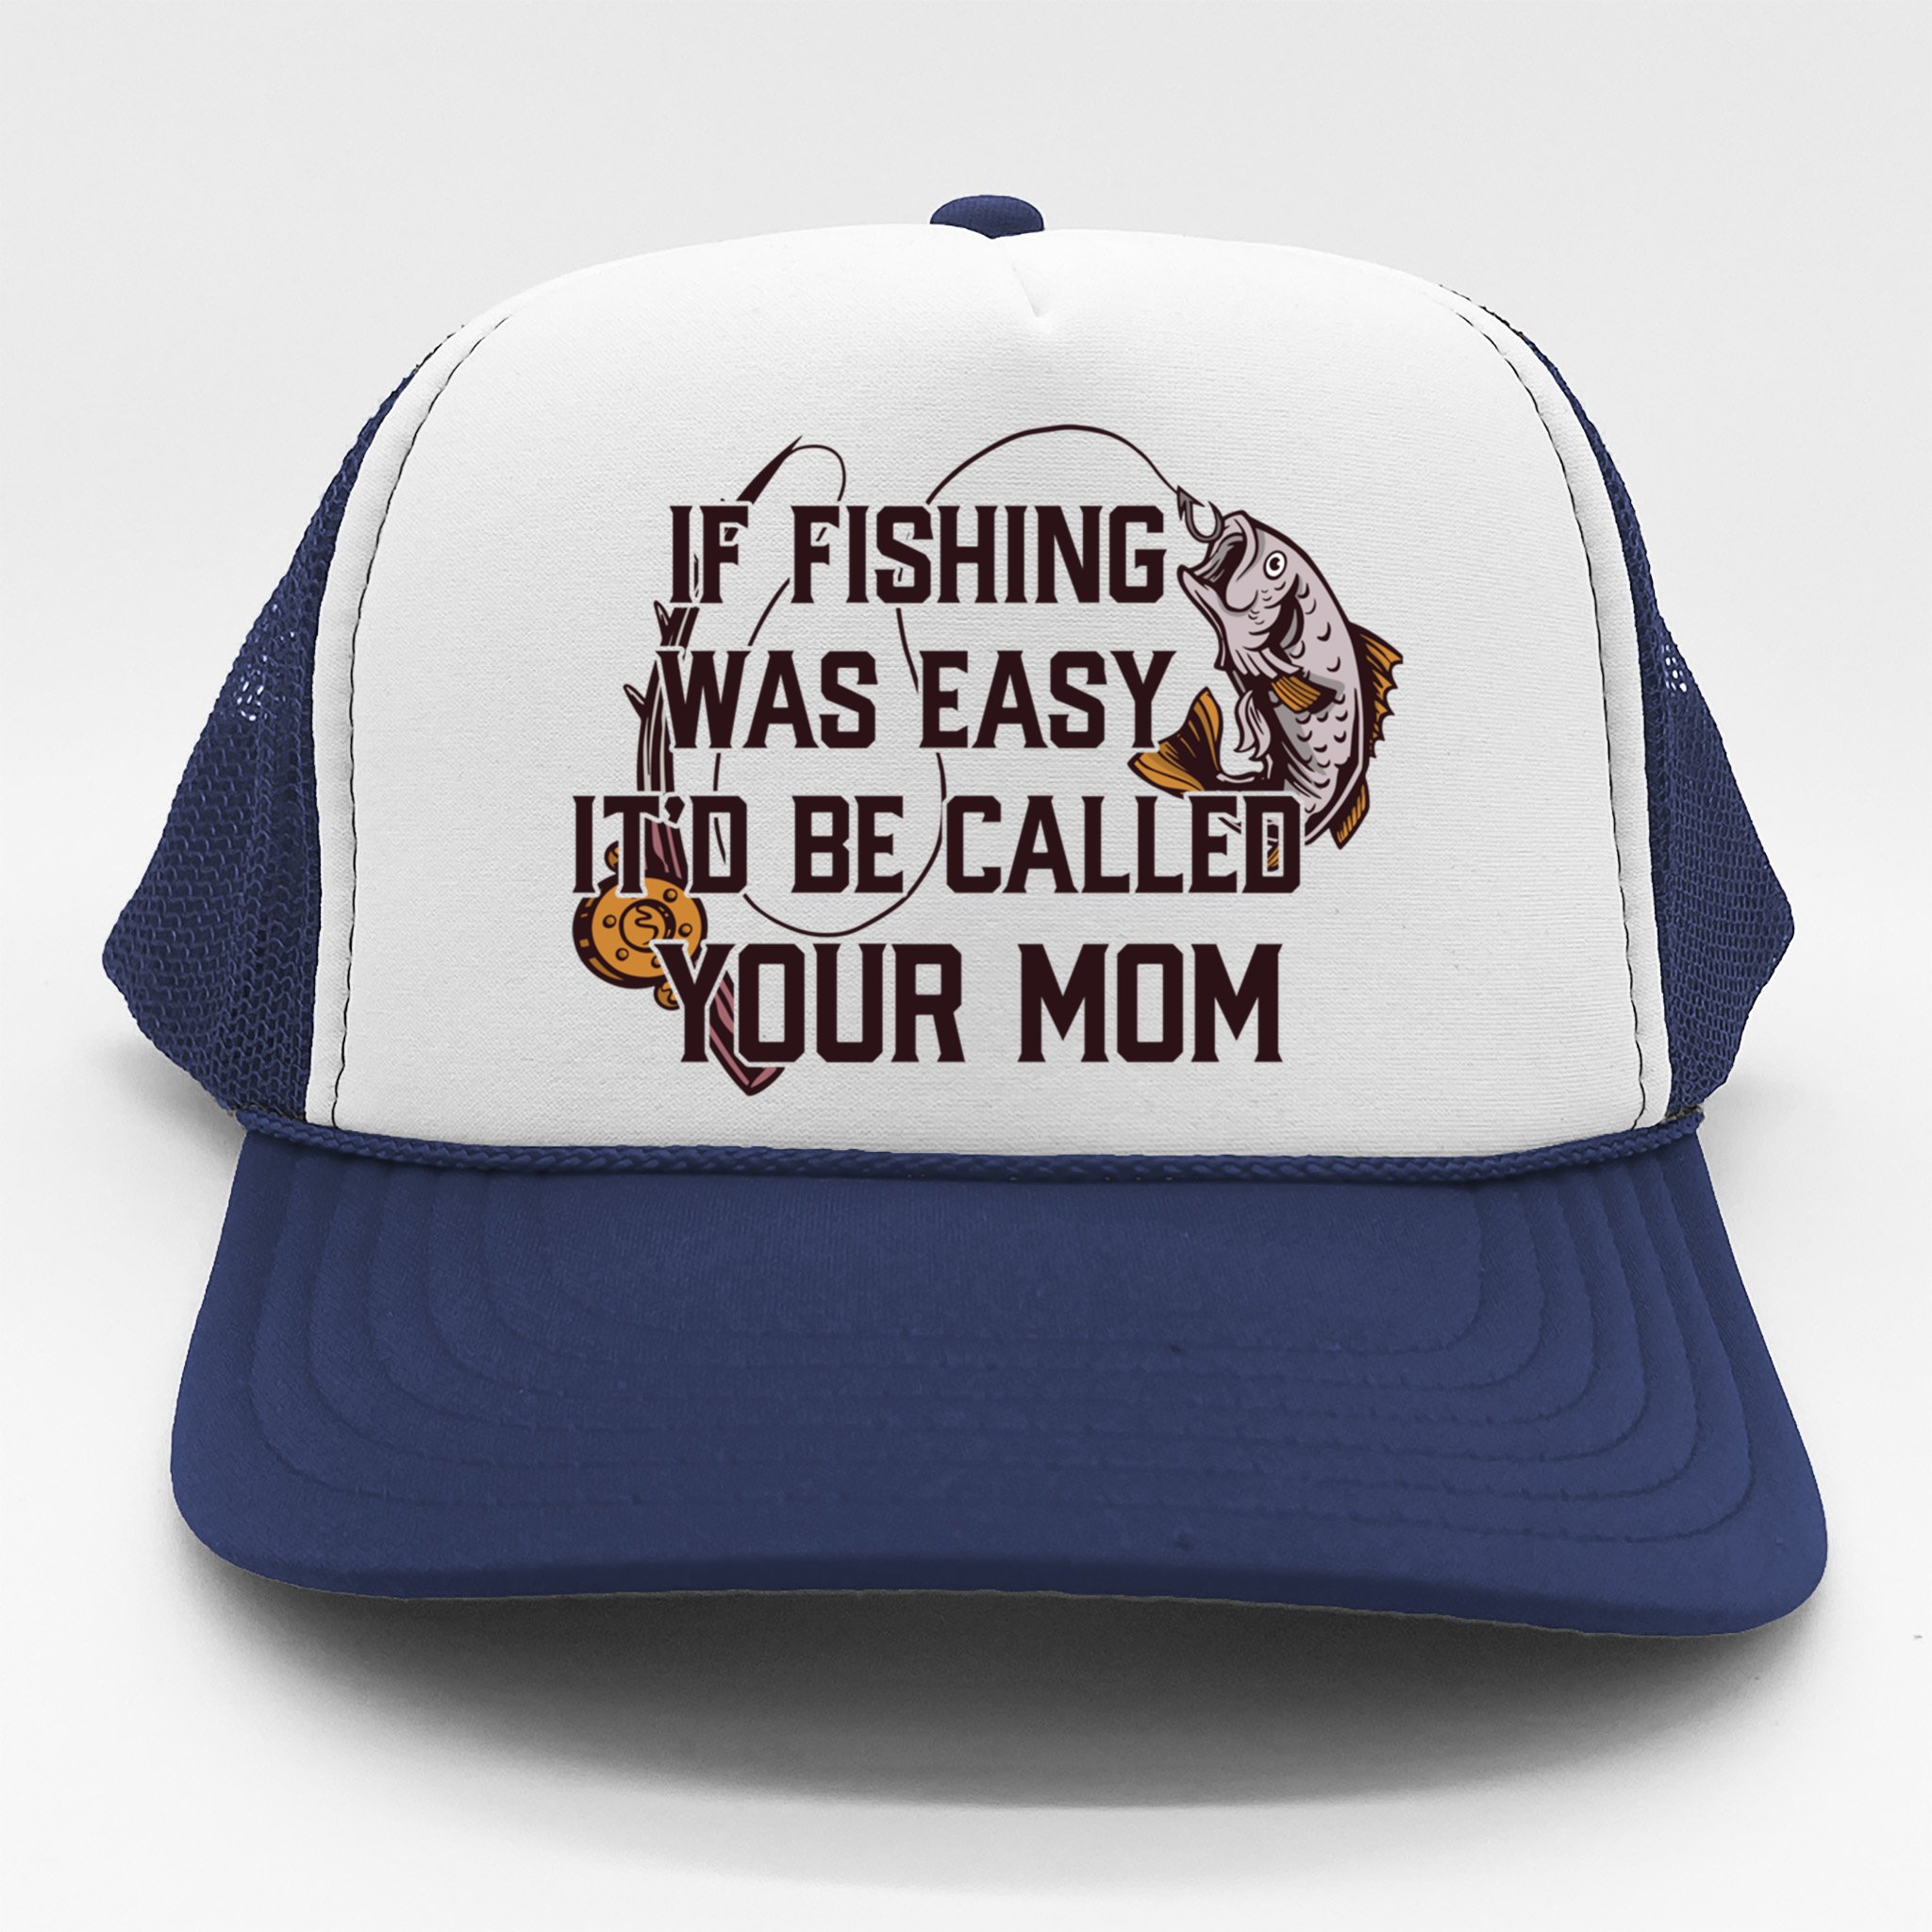 https://images3.teeshirtpalace.com/images/productImages/ifw9943231-if-fishing-was-easy-itd-be-called-your-mom-funny-fish-meme-gift--navy-th-garment.jpg